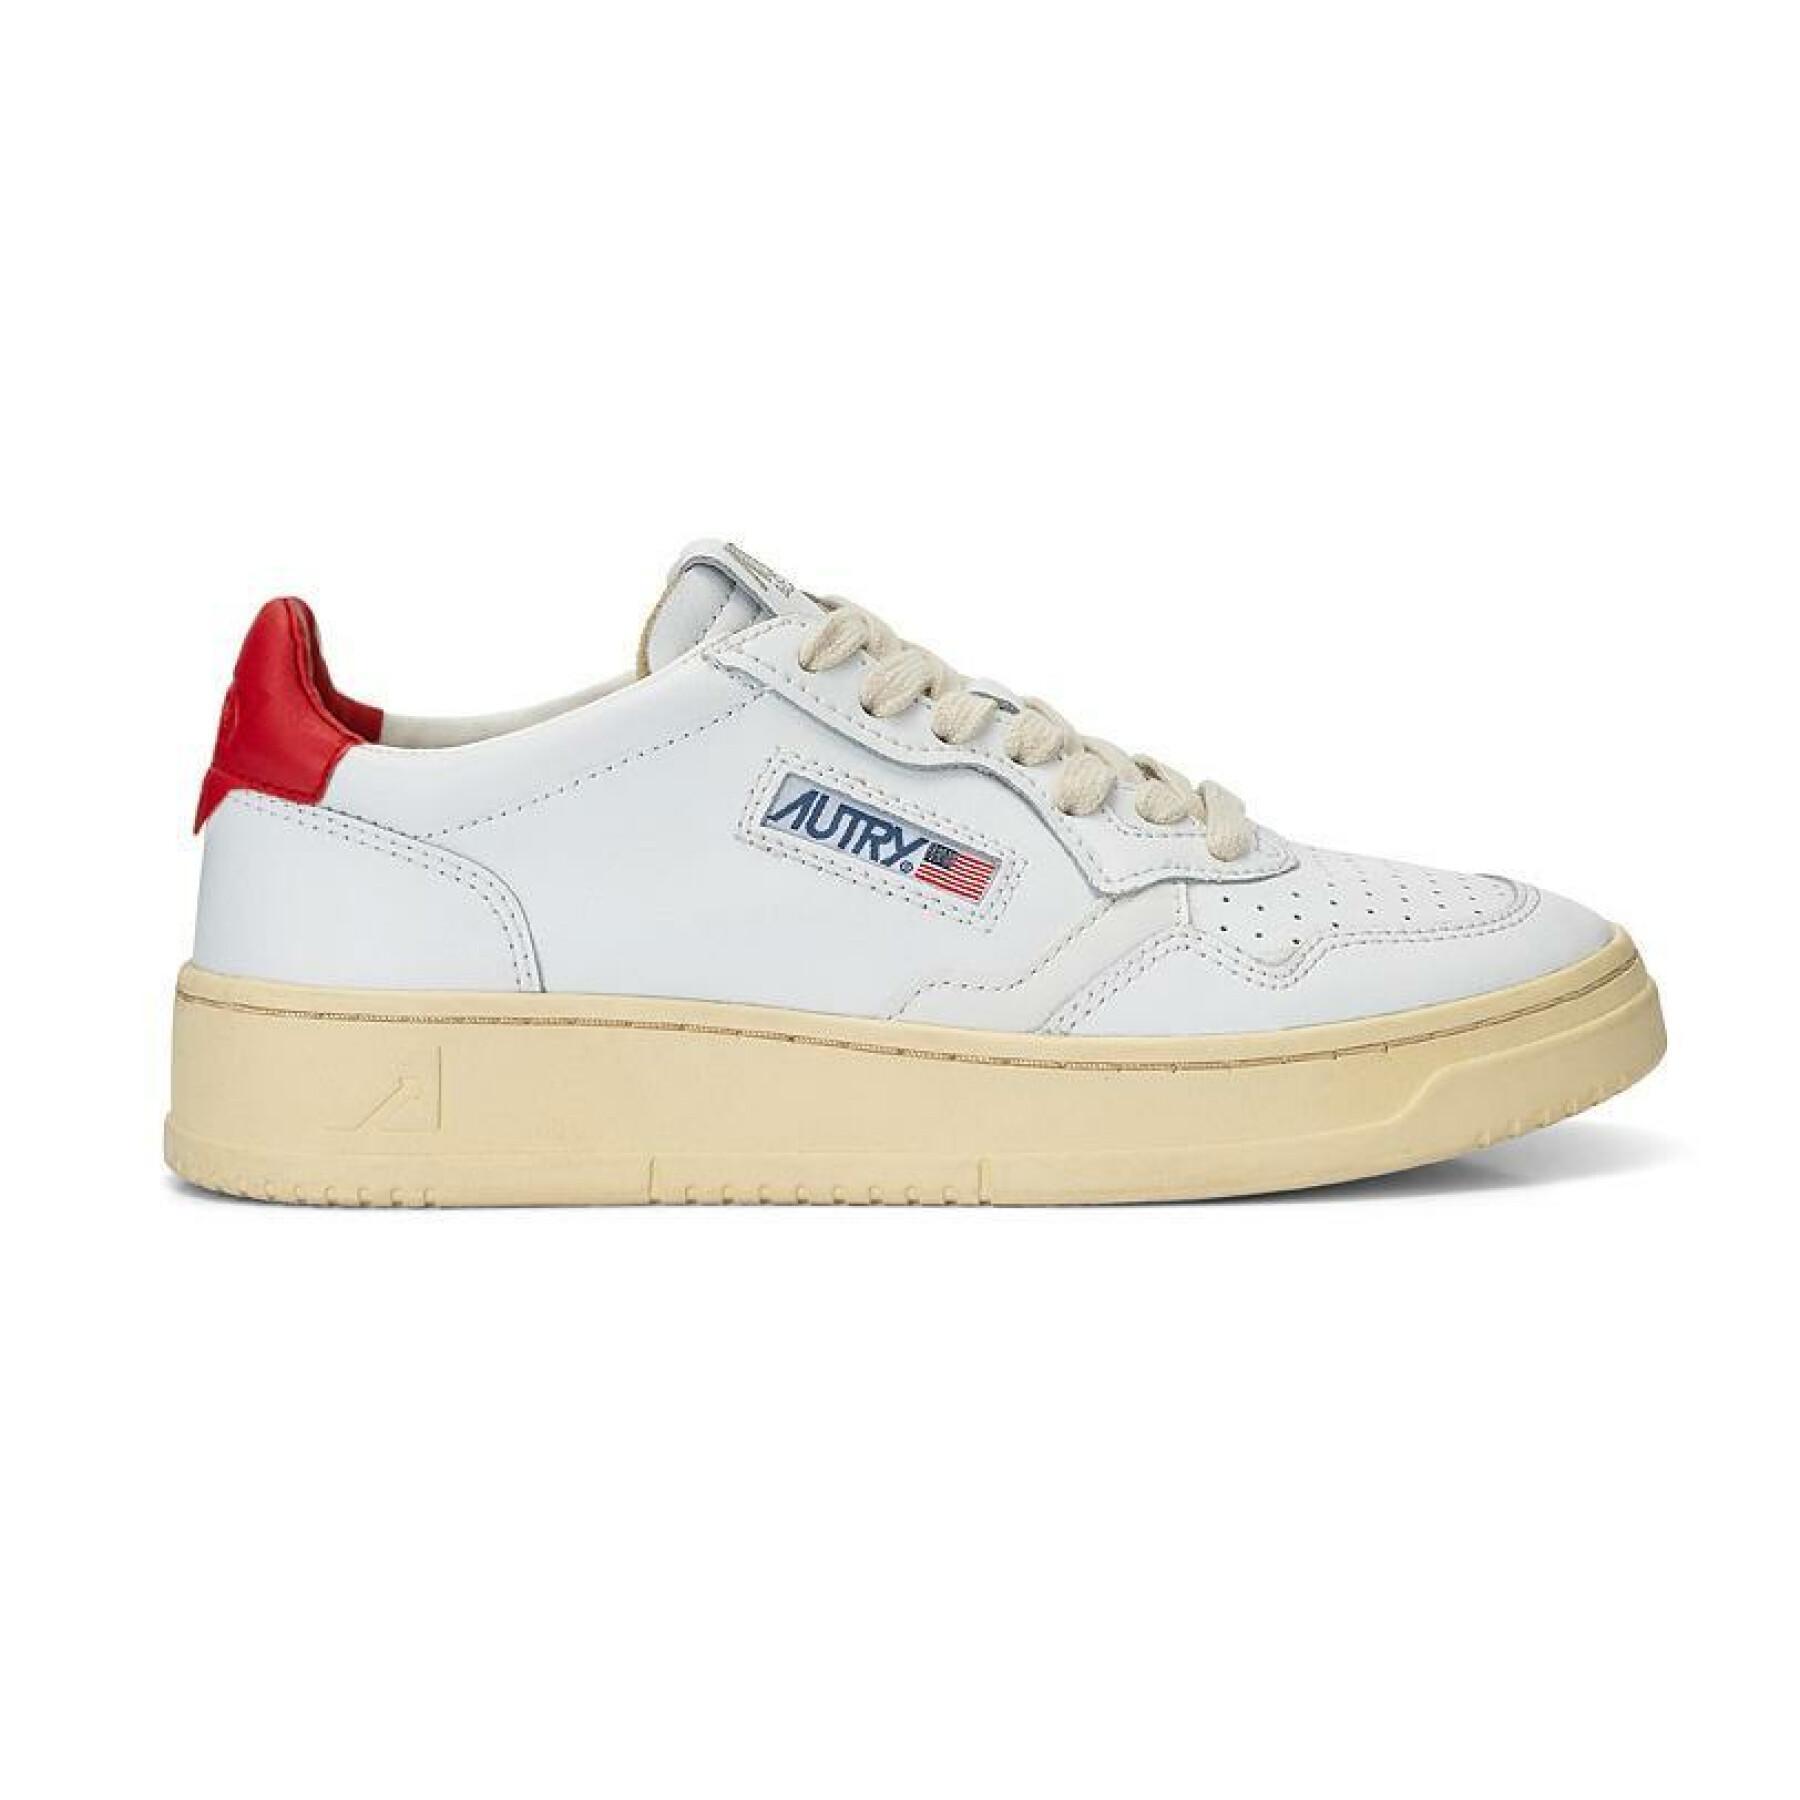 Women's sneakers Autry Medalist LL21 Leather White/Red